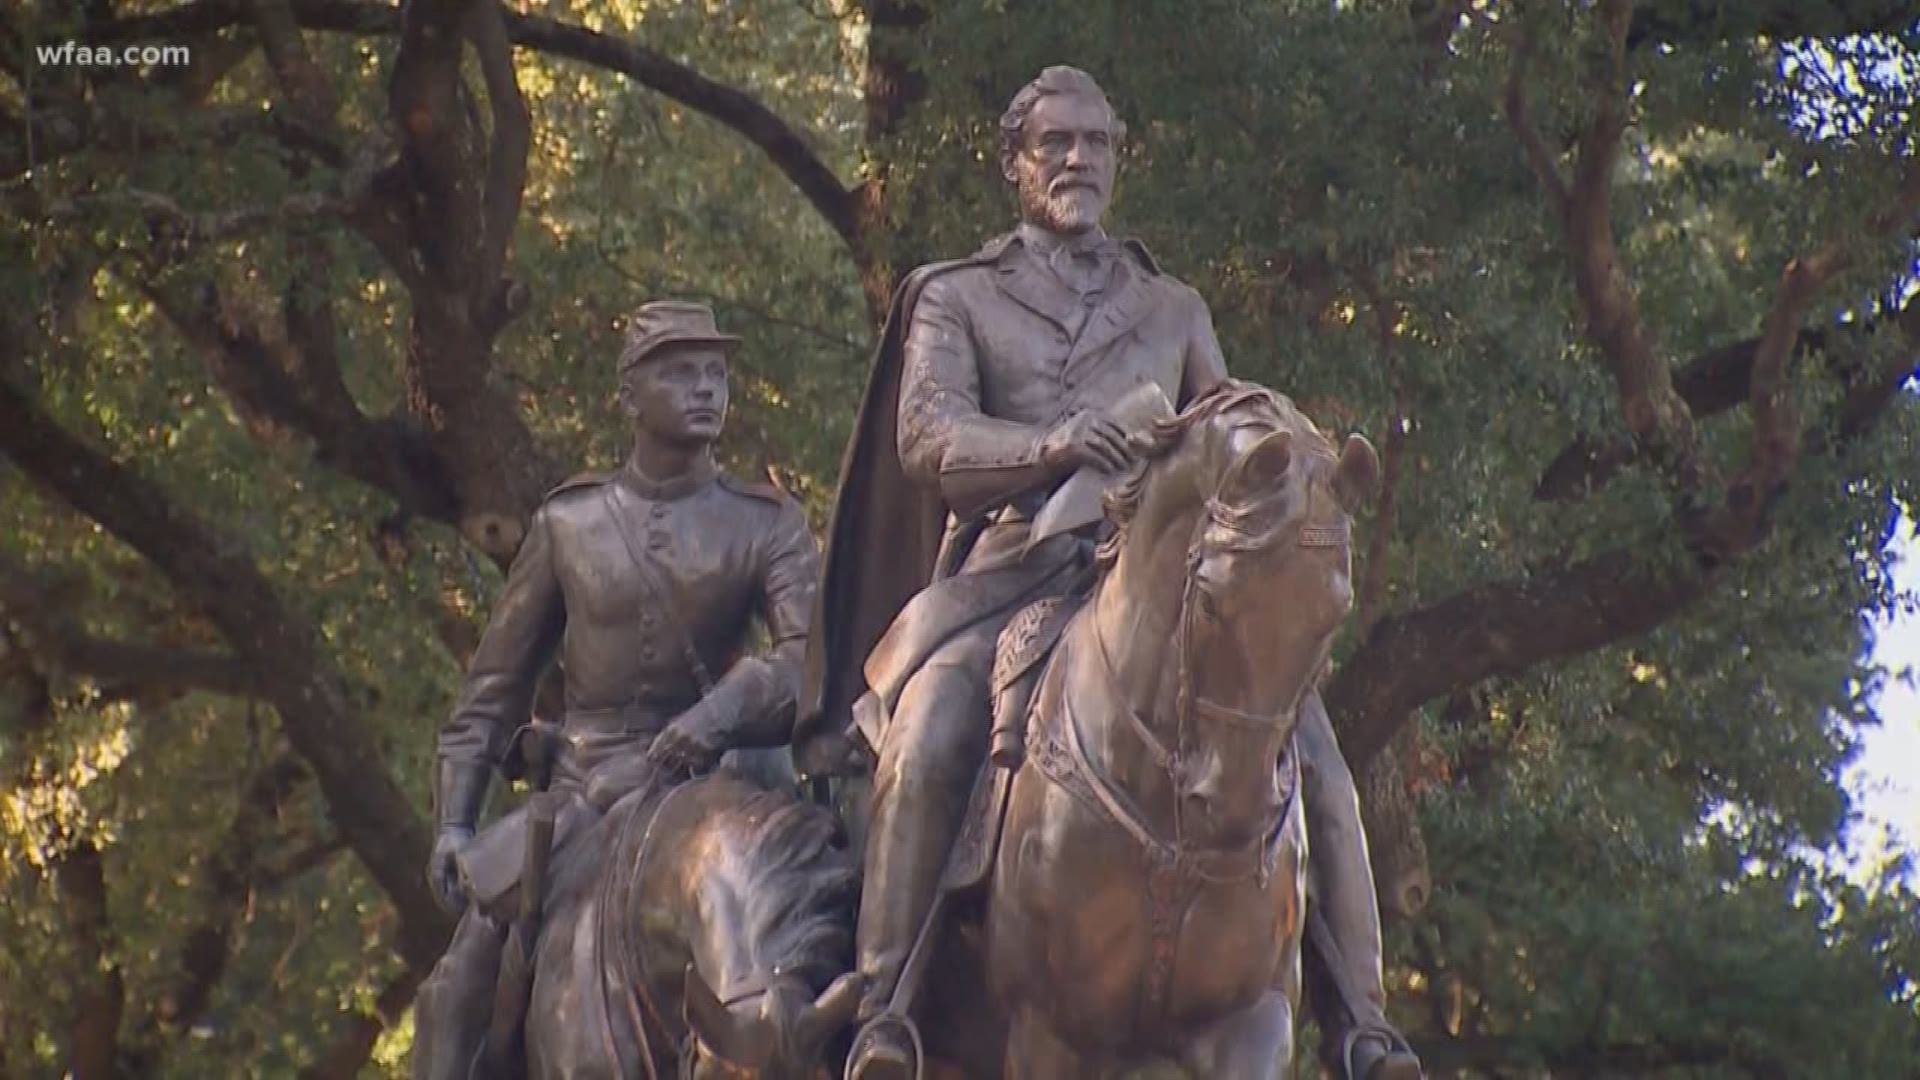 A statue of Confederate Gen. Robert. E. Lee and a young solider, which was removed from a Dallas park and sold at auction, has been donated to a golf resort.